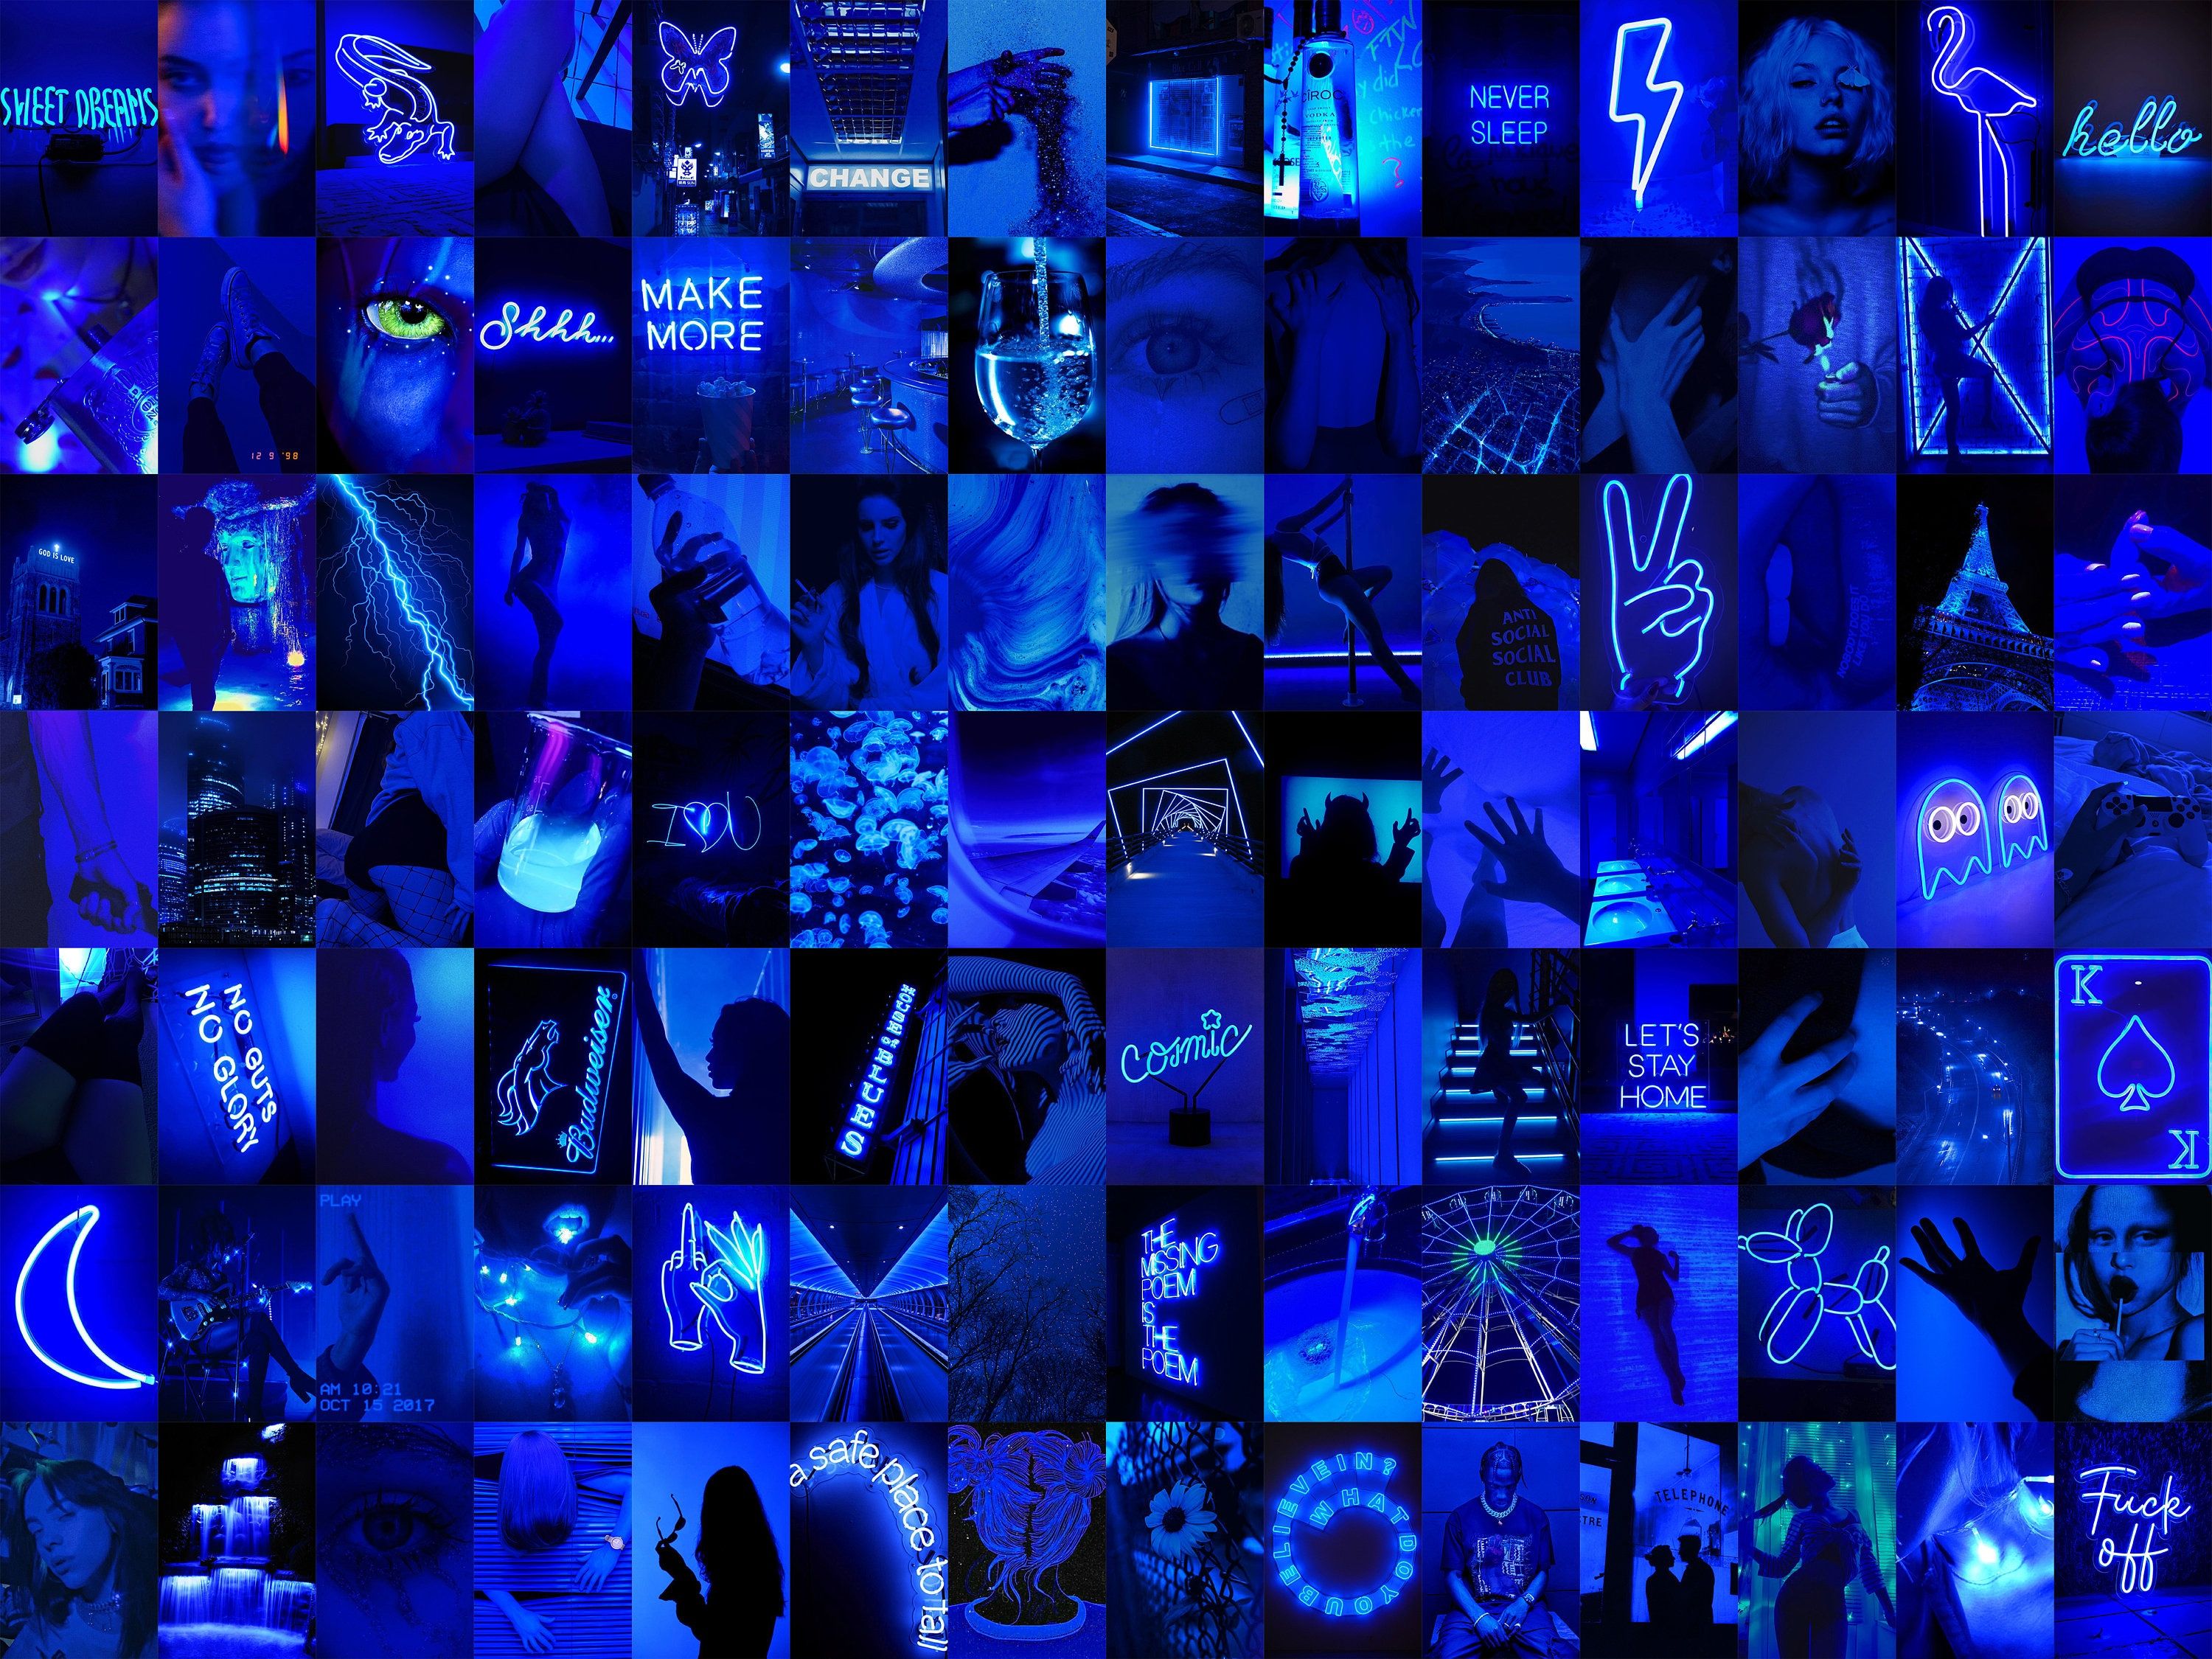 A collage of blue images with people in them - Indigo, dark blue, navy blue, neon blue